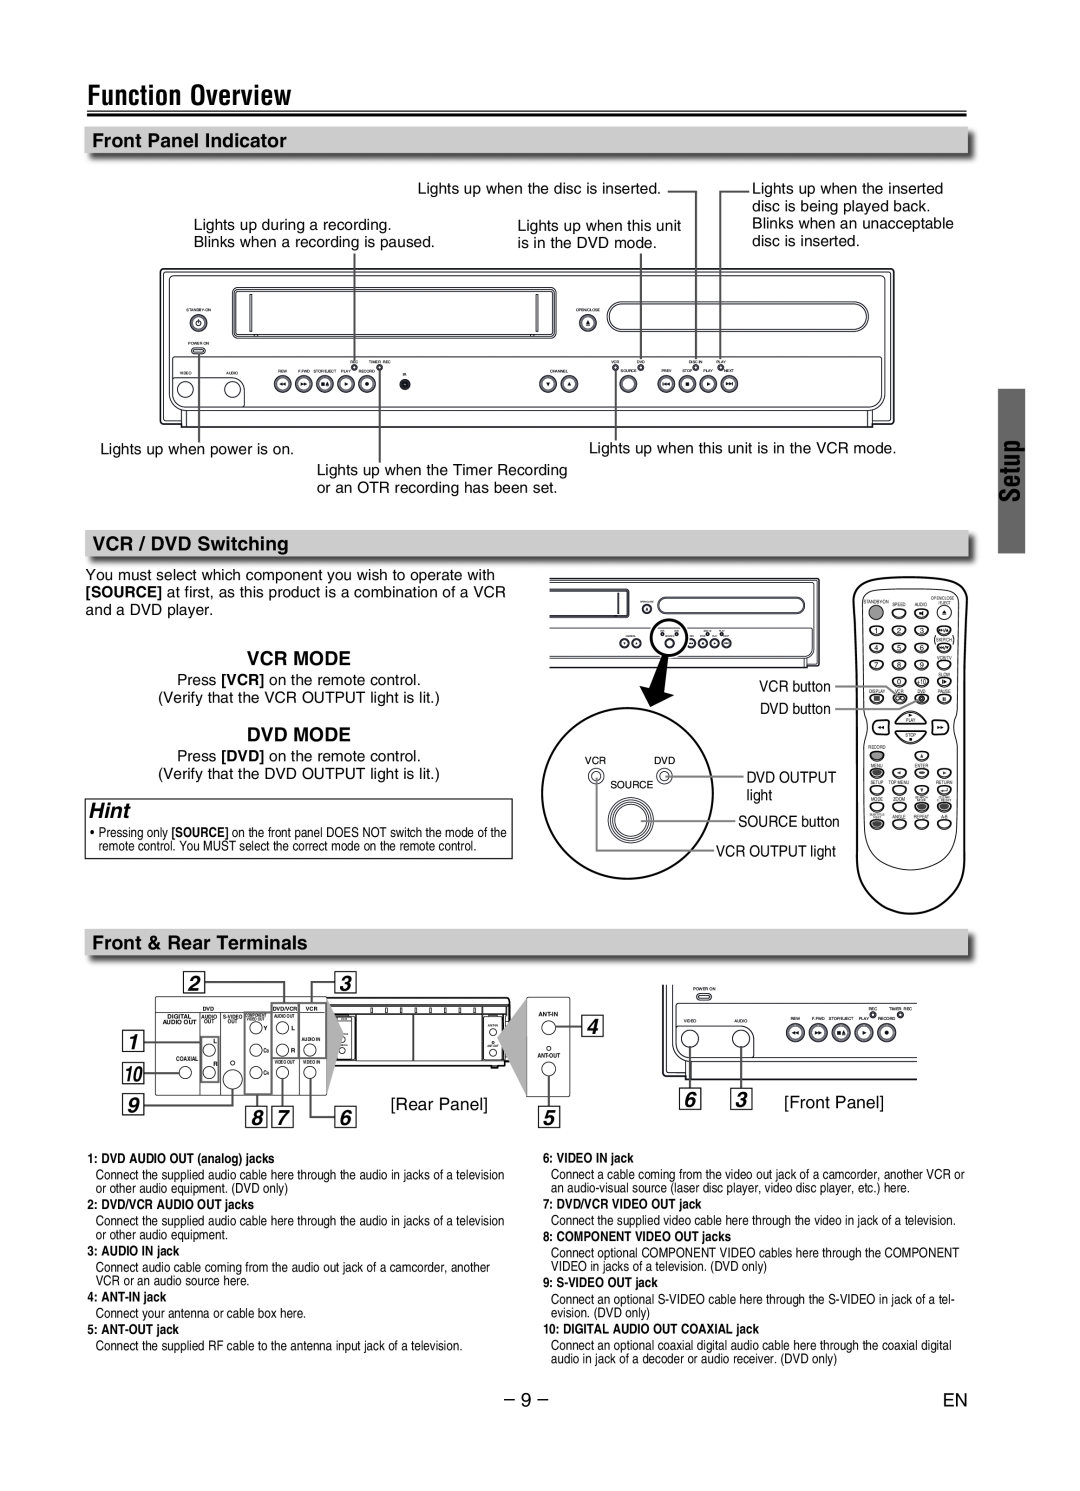 Magnavox MWD2206A Function Overview, Front Panel Indicator, VCR / DVD Switching, Vcr Mode, Dvd Mode, Rear Panel, Setup 